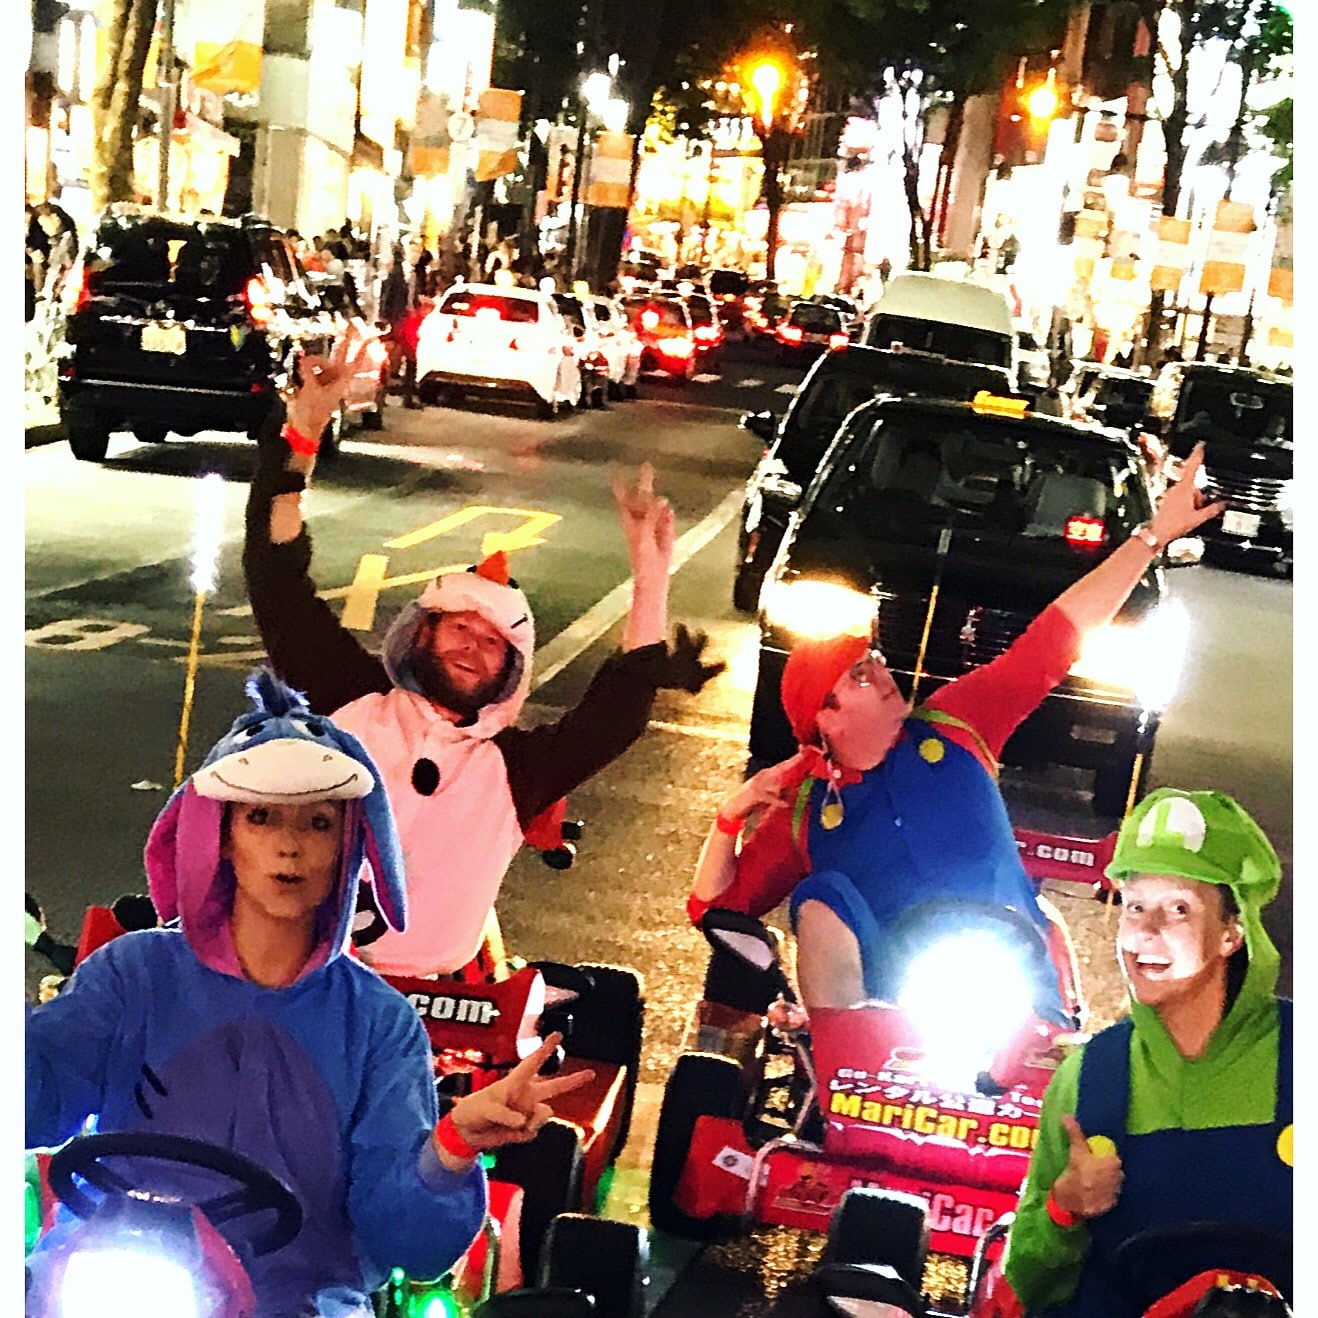 MARIO CART ( SINCE RENAMED) EXPERIENCE IN TOKYO